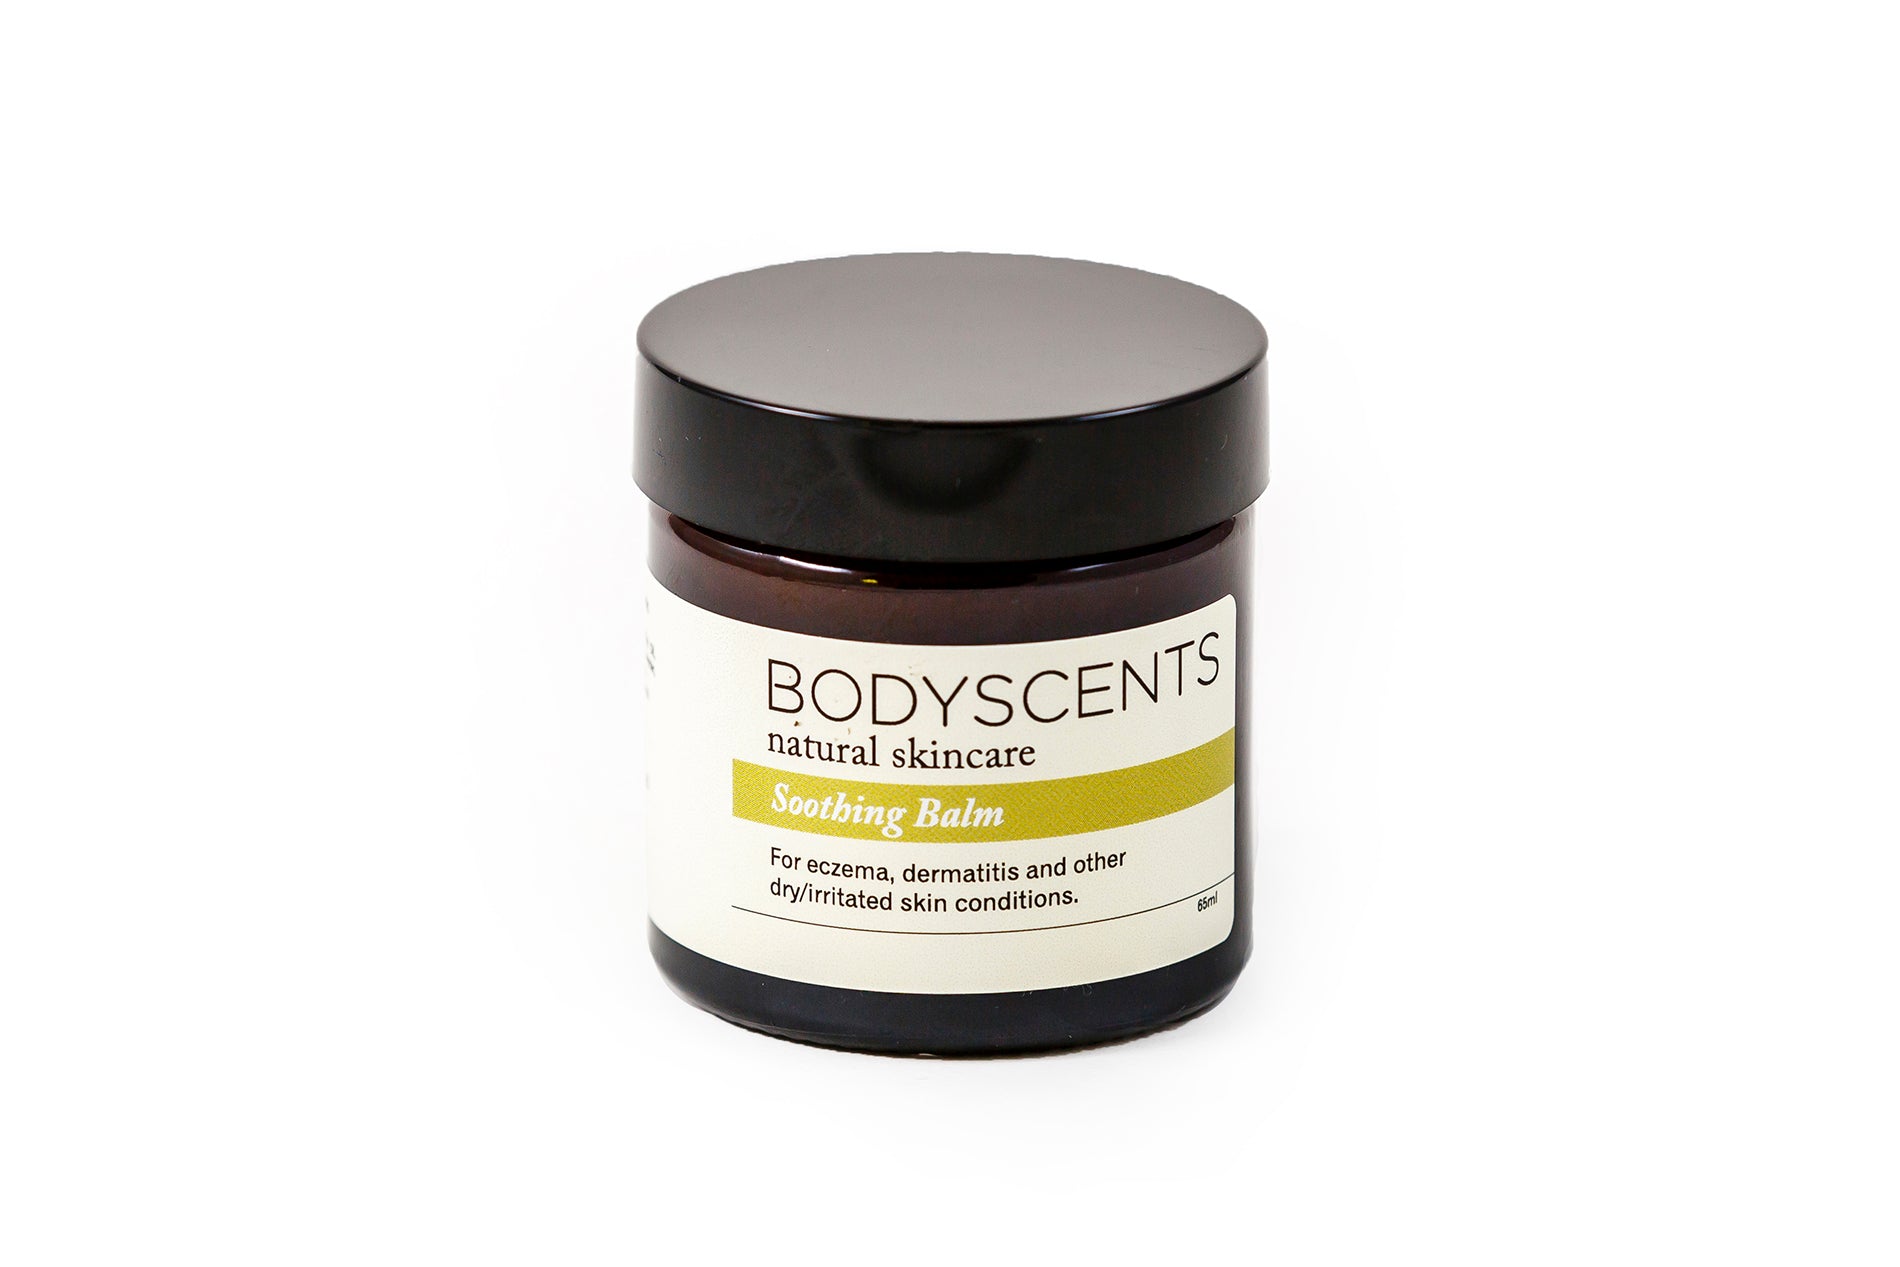 Soothing Balm - Bodyscents